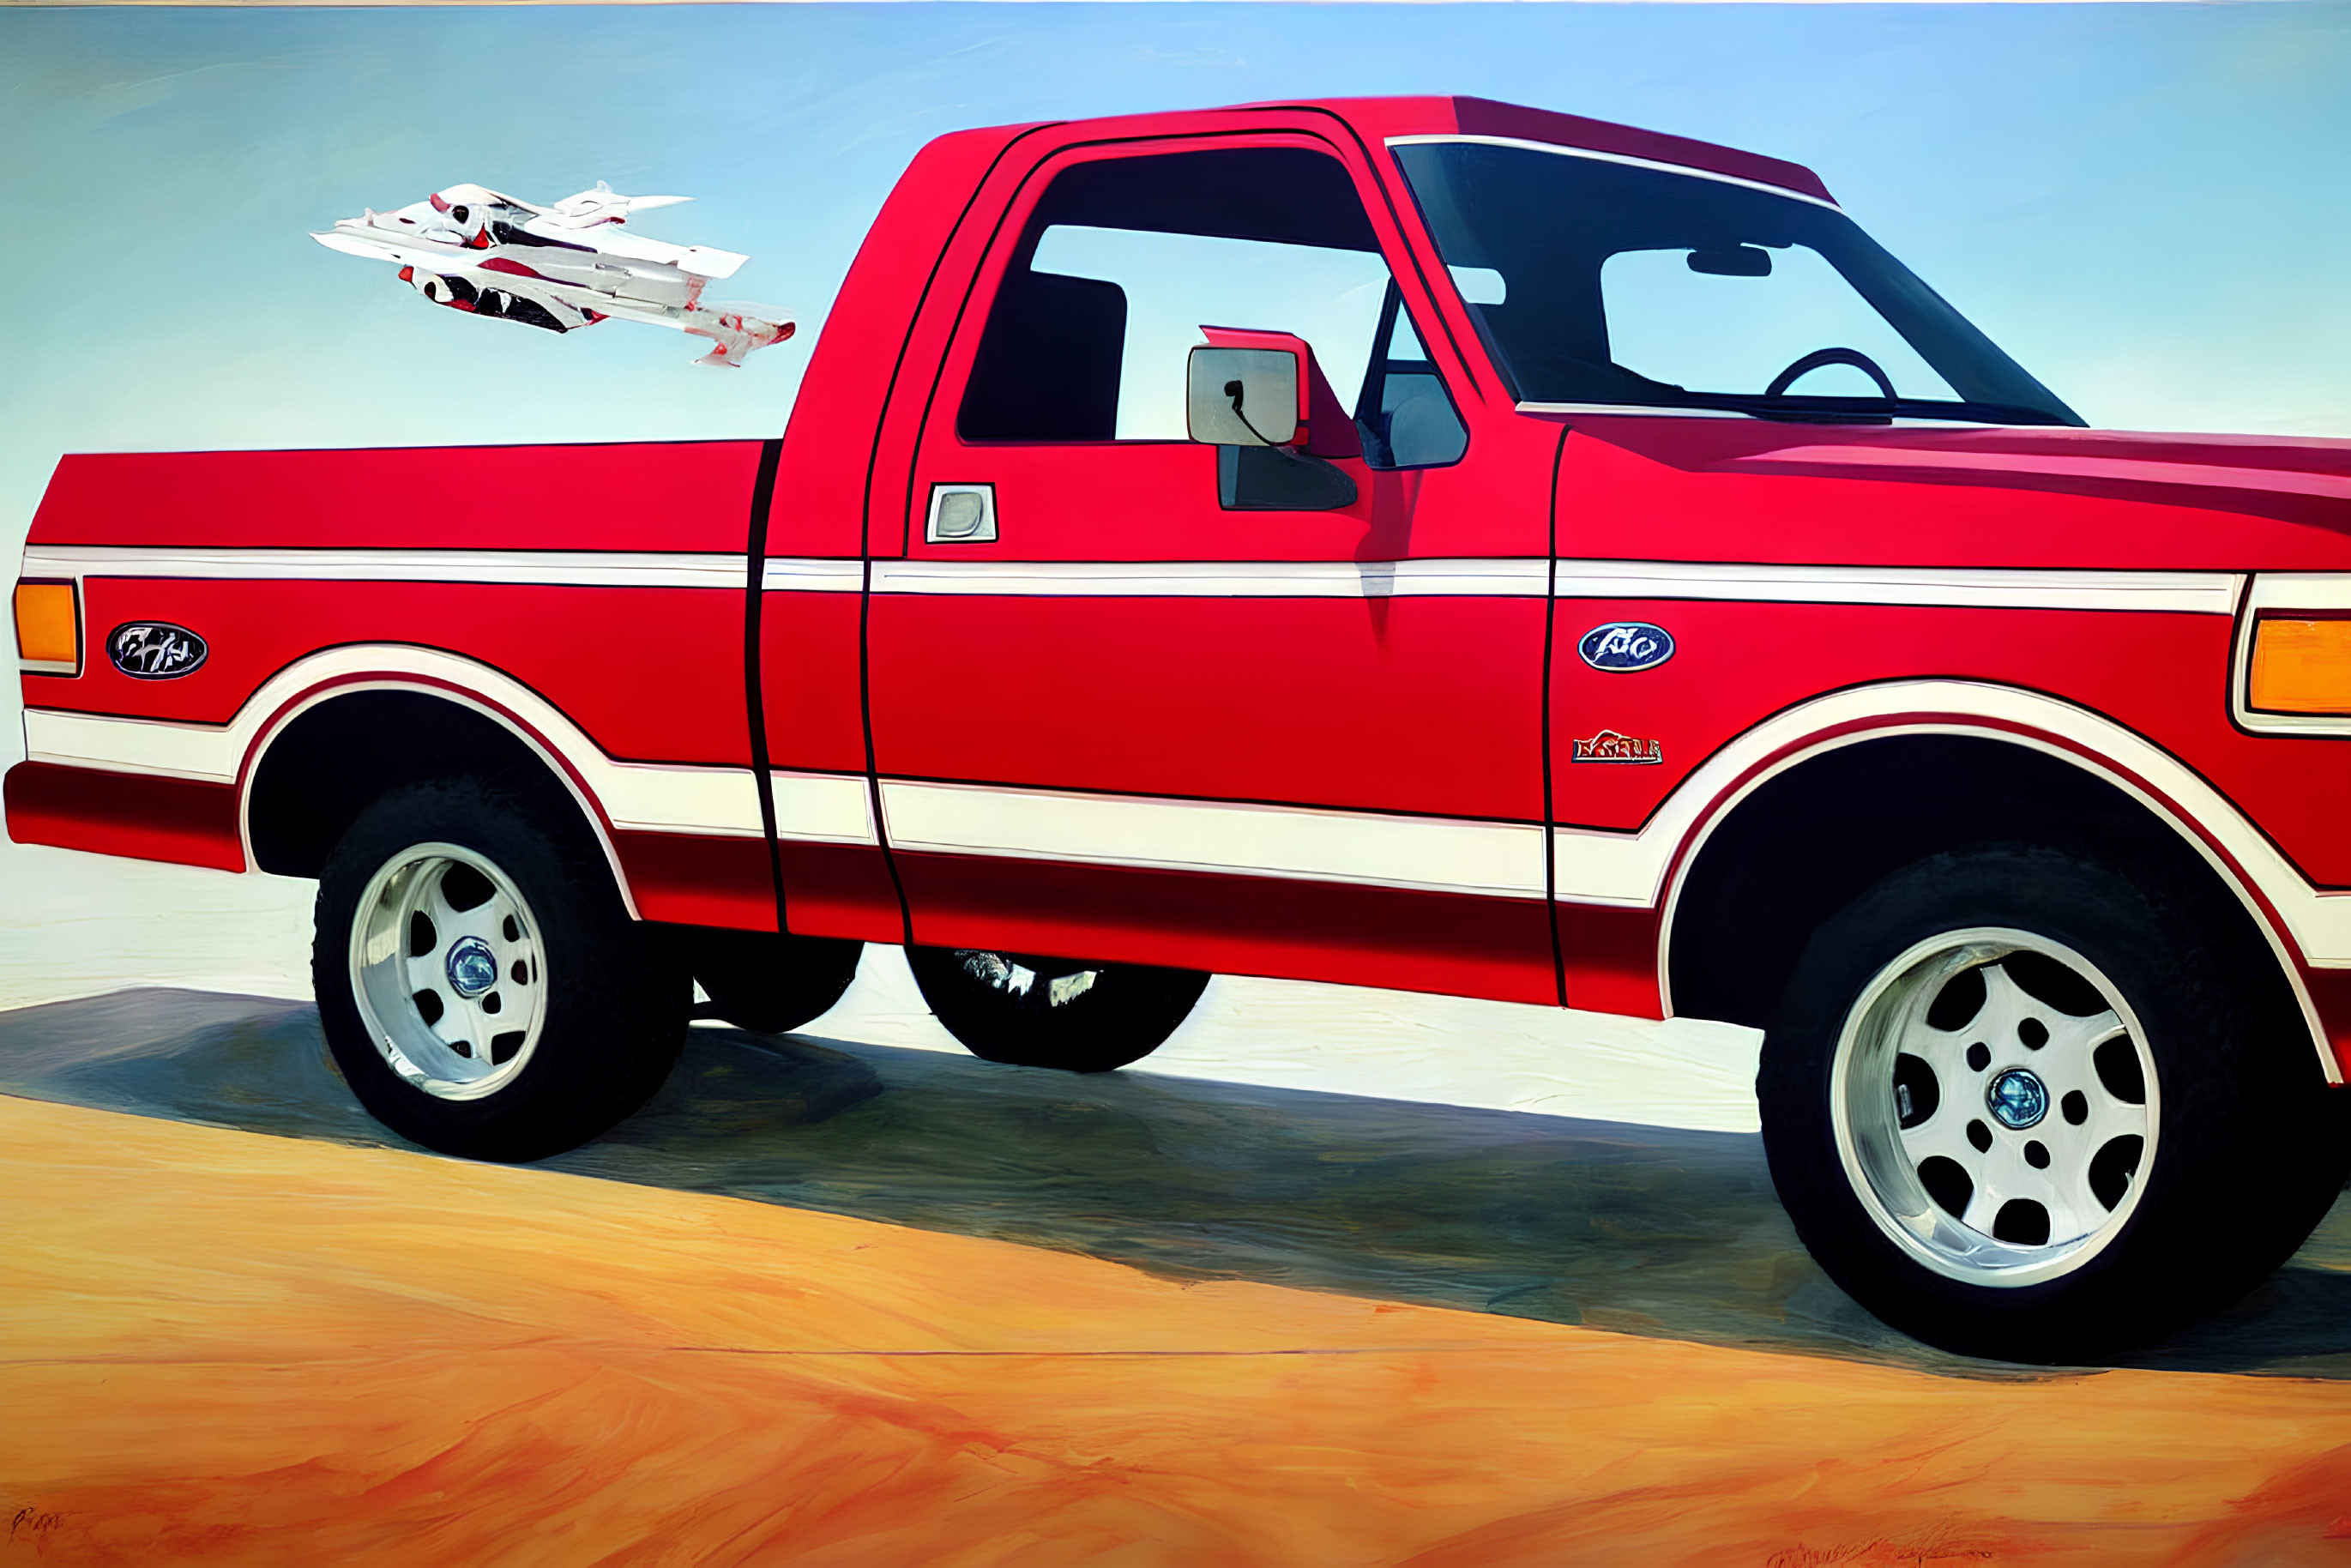 Red and White Ford Pickup Truck on Sandy Terrain with Jet Flying Overhead